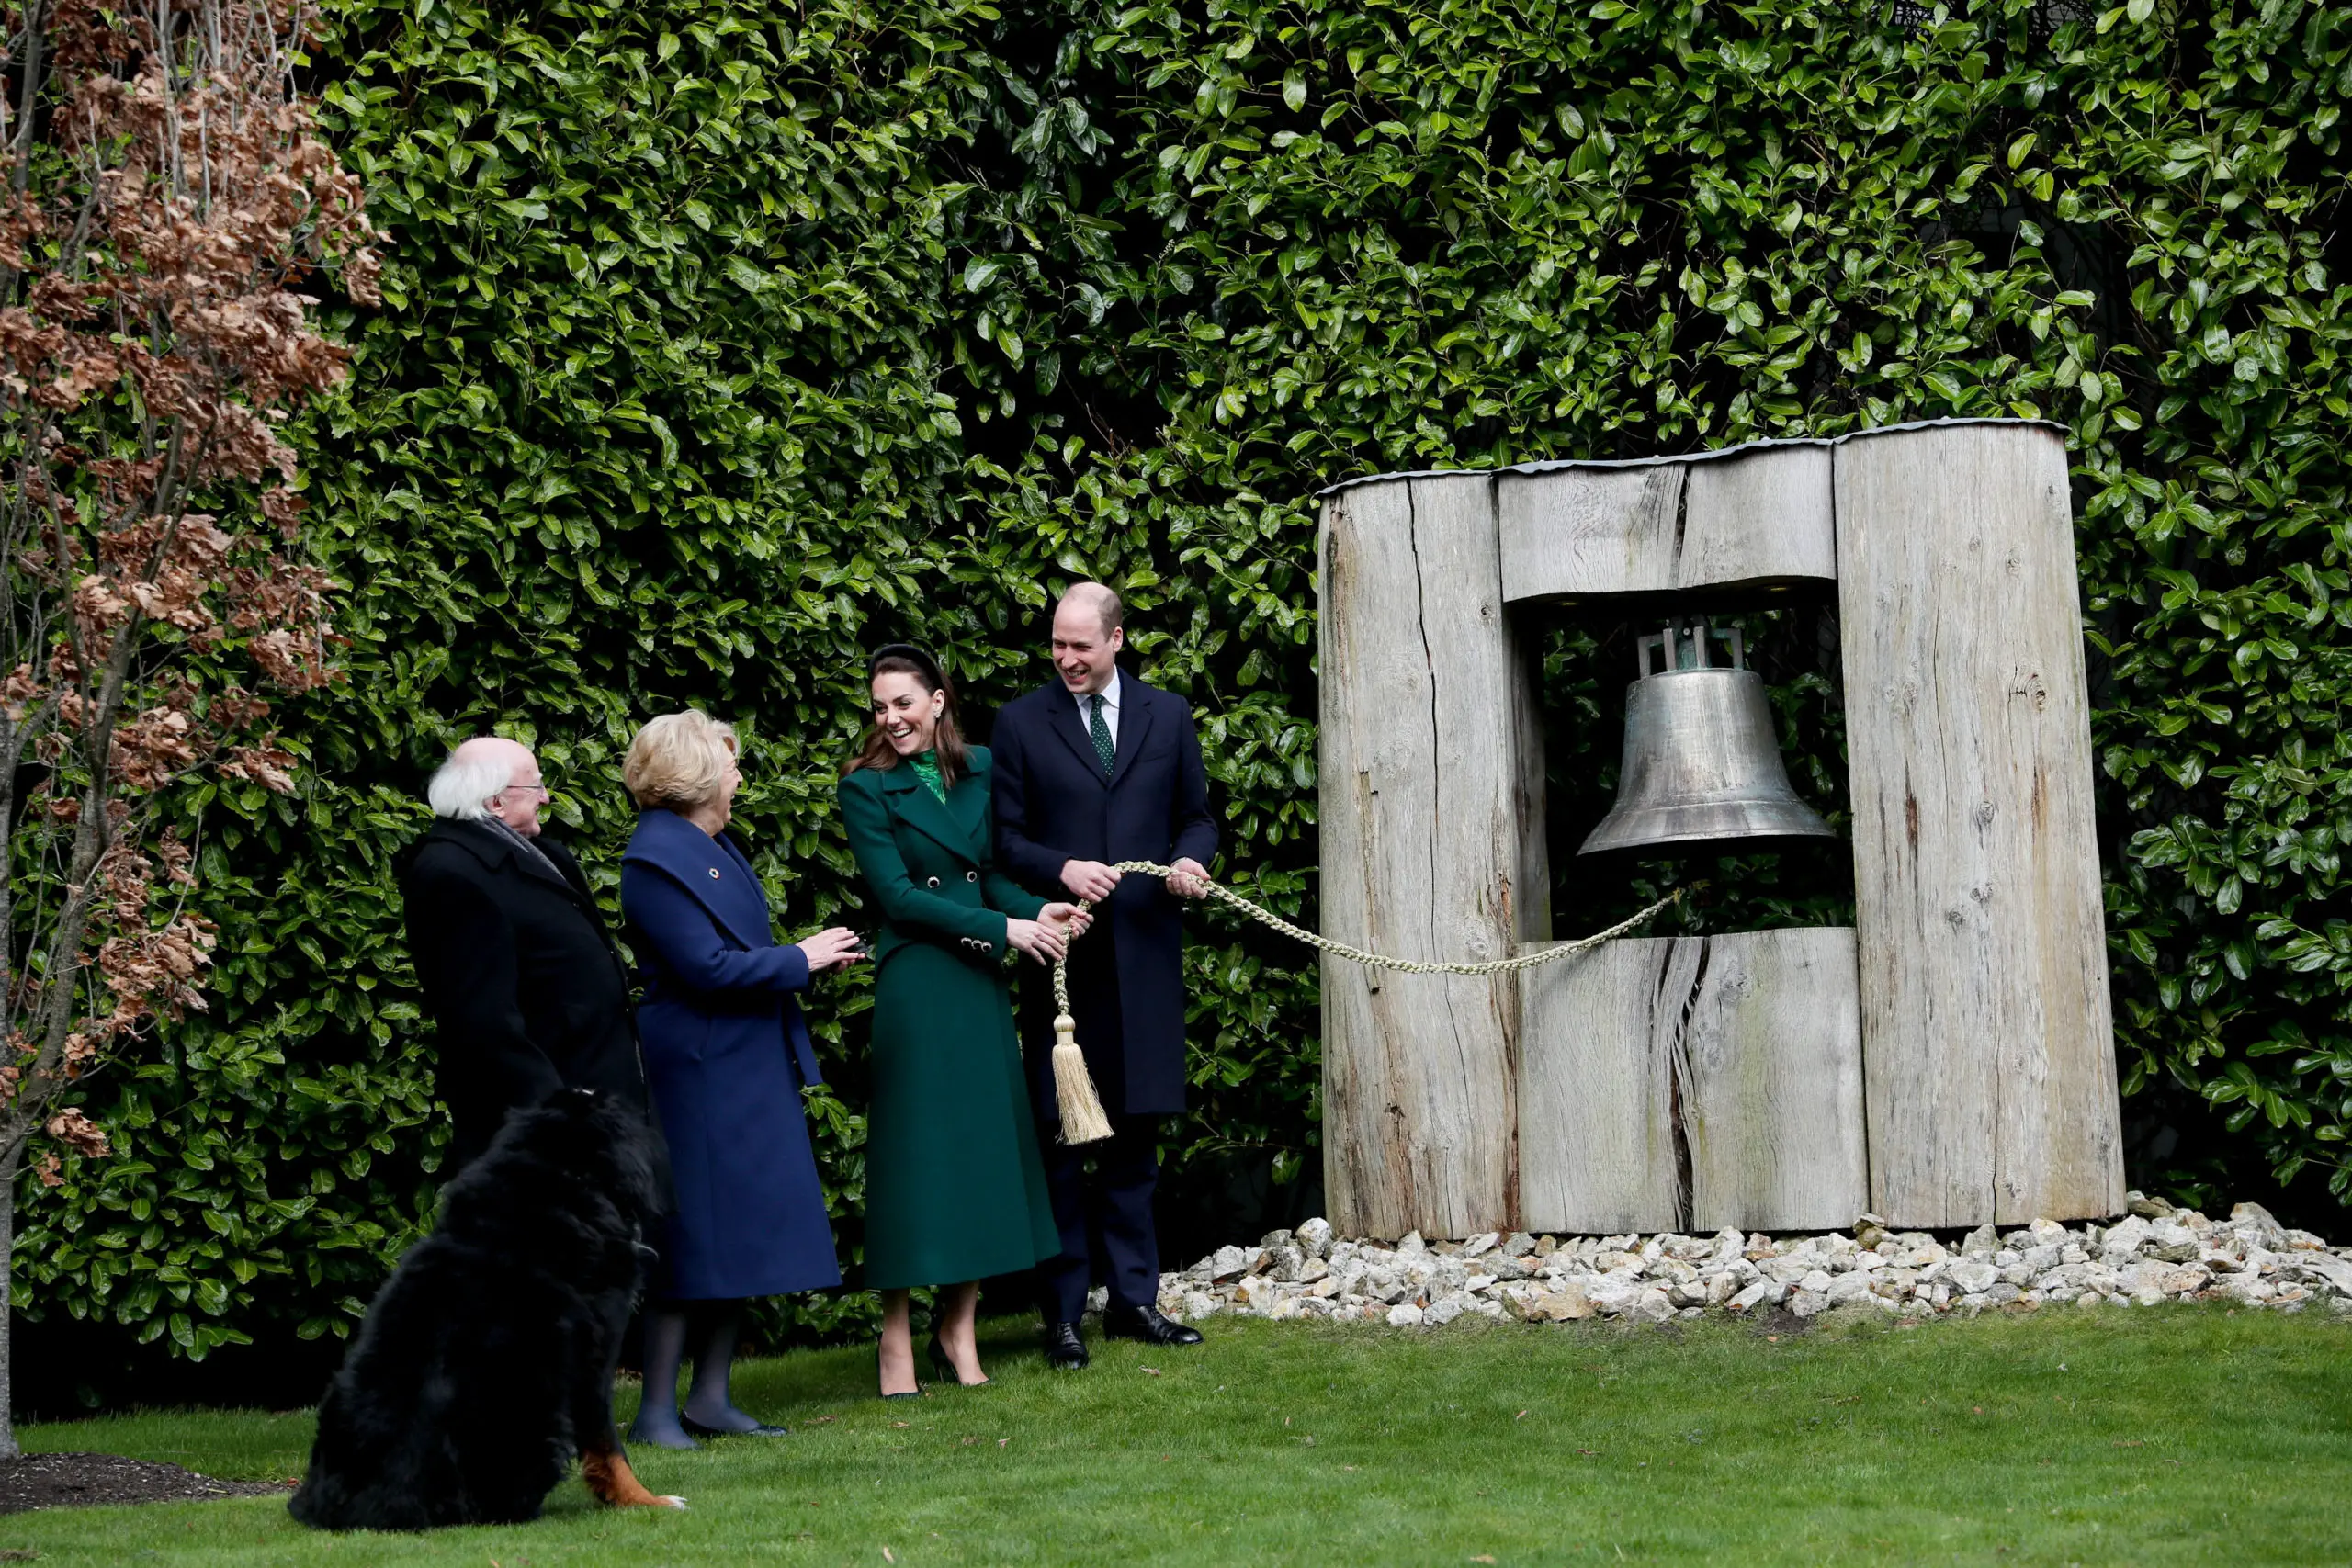 The Duke and Duchess of Cambridge rang the Peace Bell in Ireland